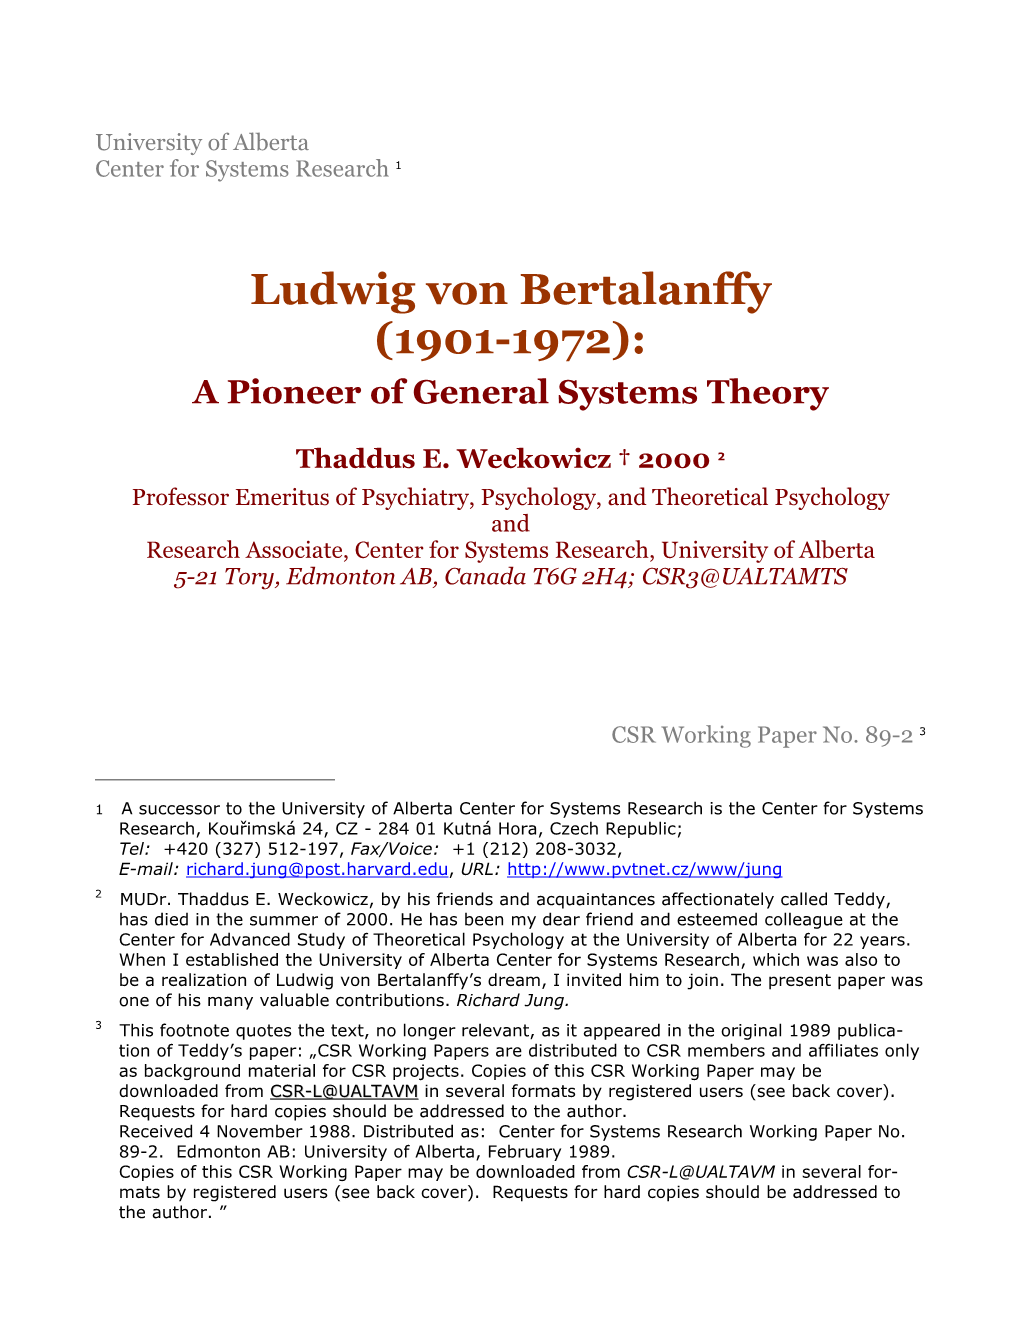 Ludwig Von Bertalanffy (1901-1972): a Pioneer of General Systems Theory